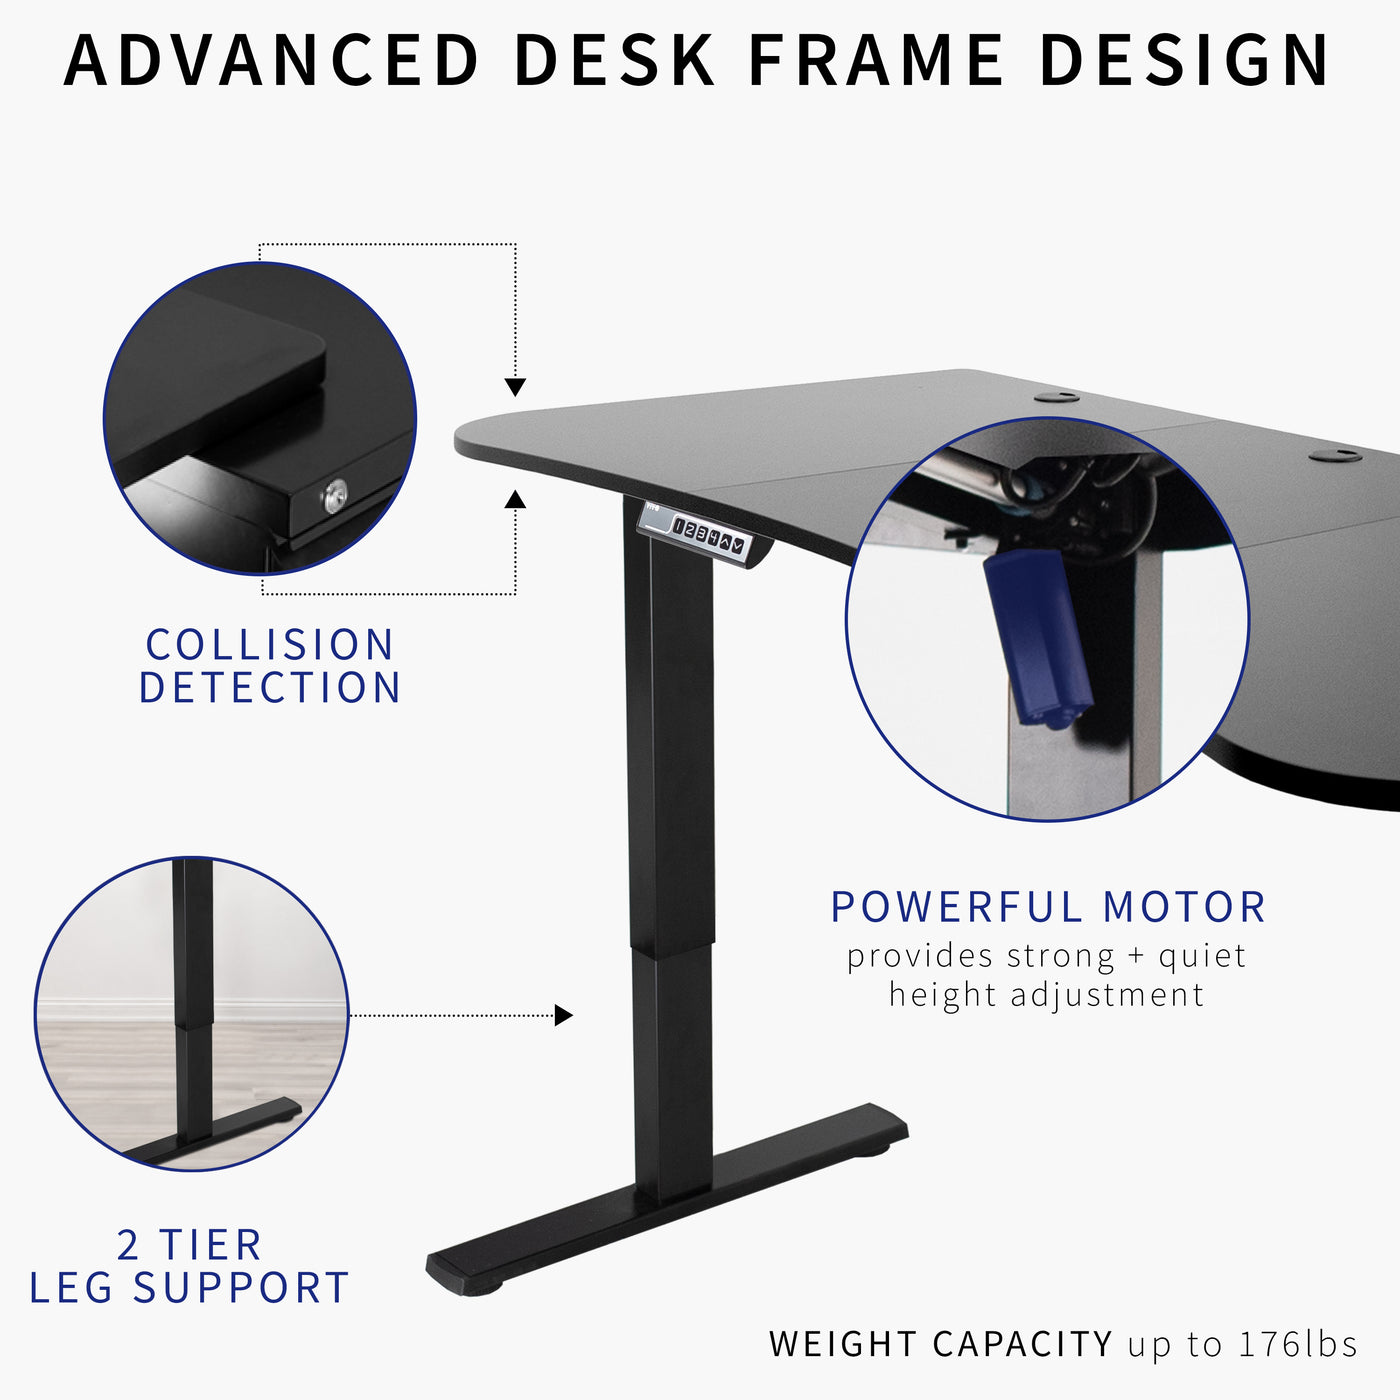 Advanced frame design for maximum support and elevation of office equipment.